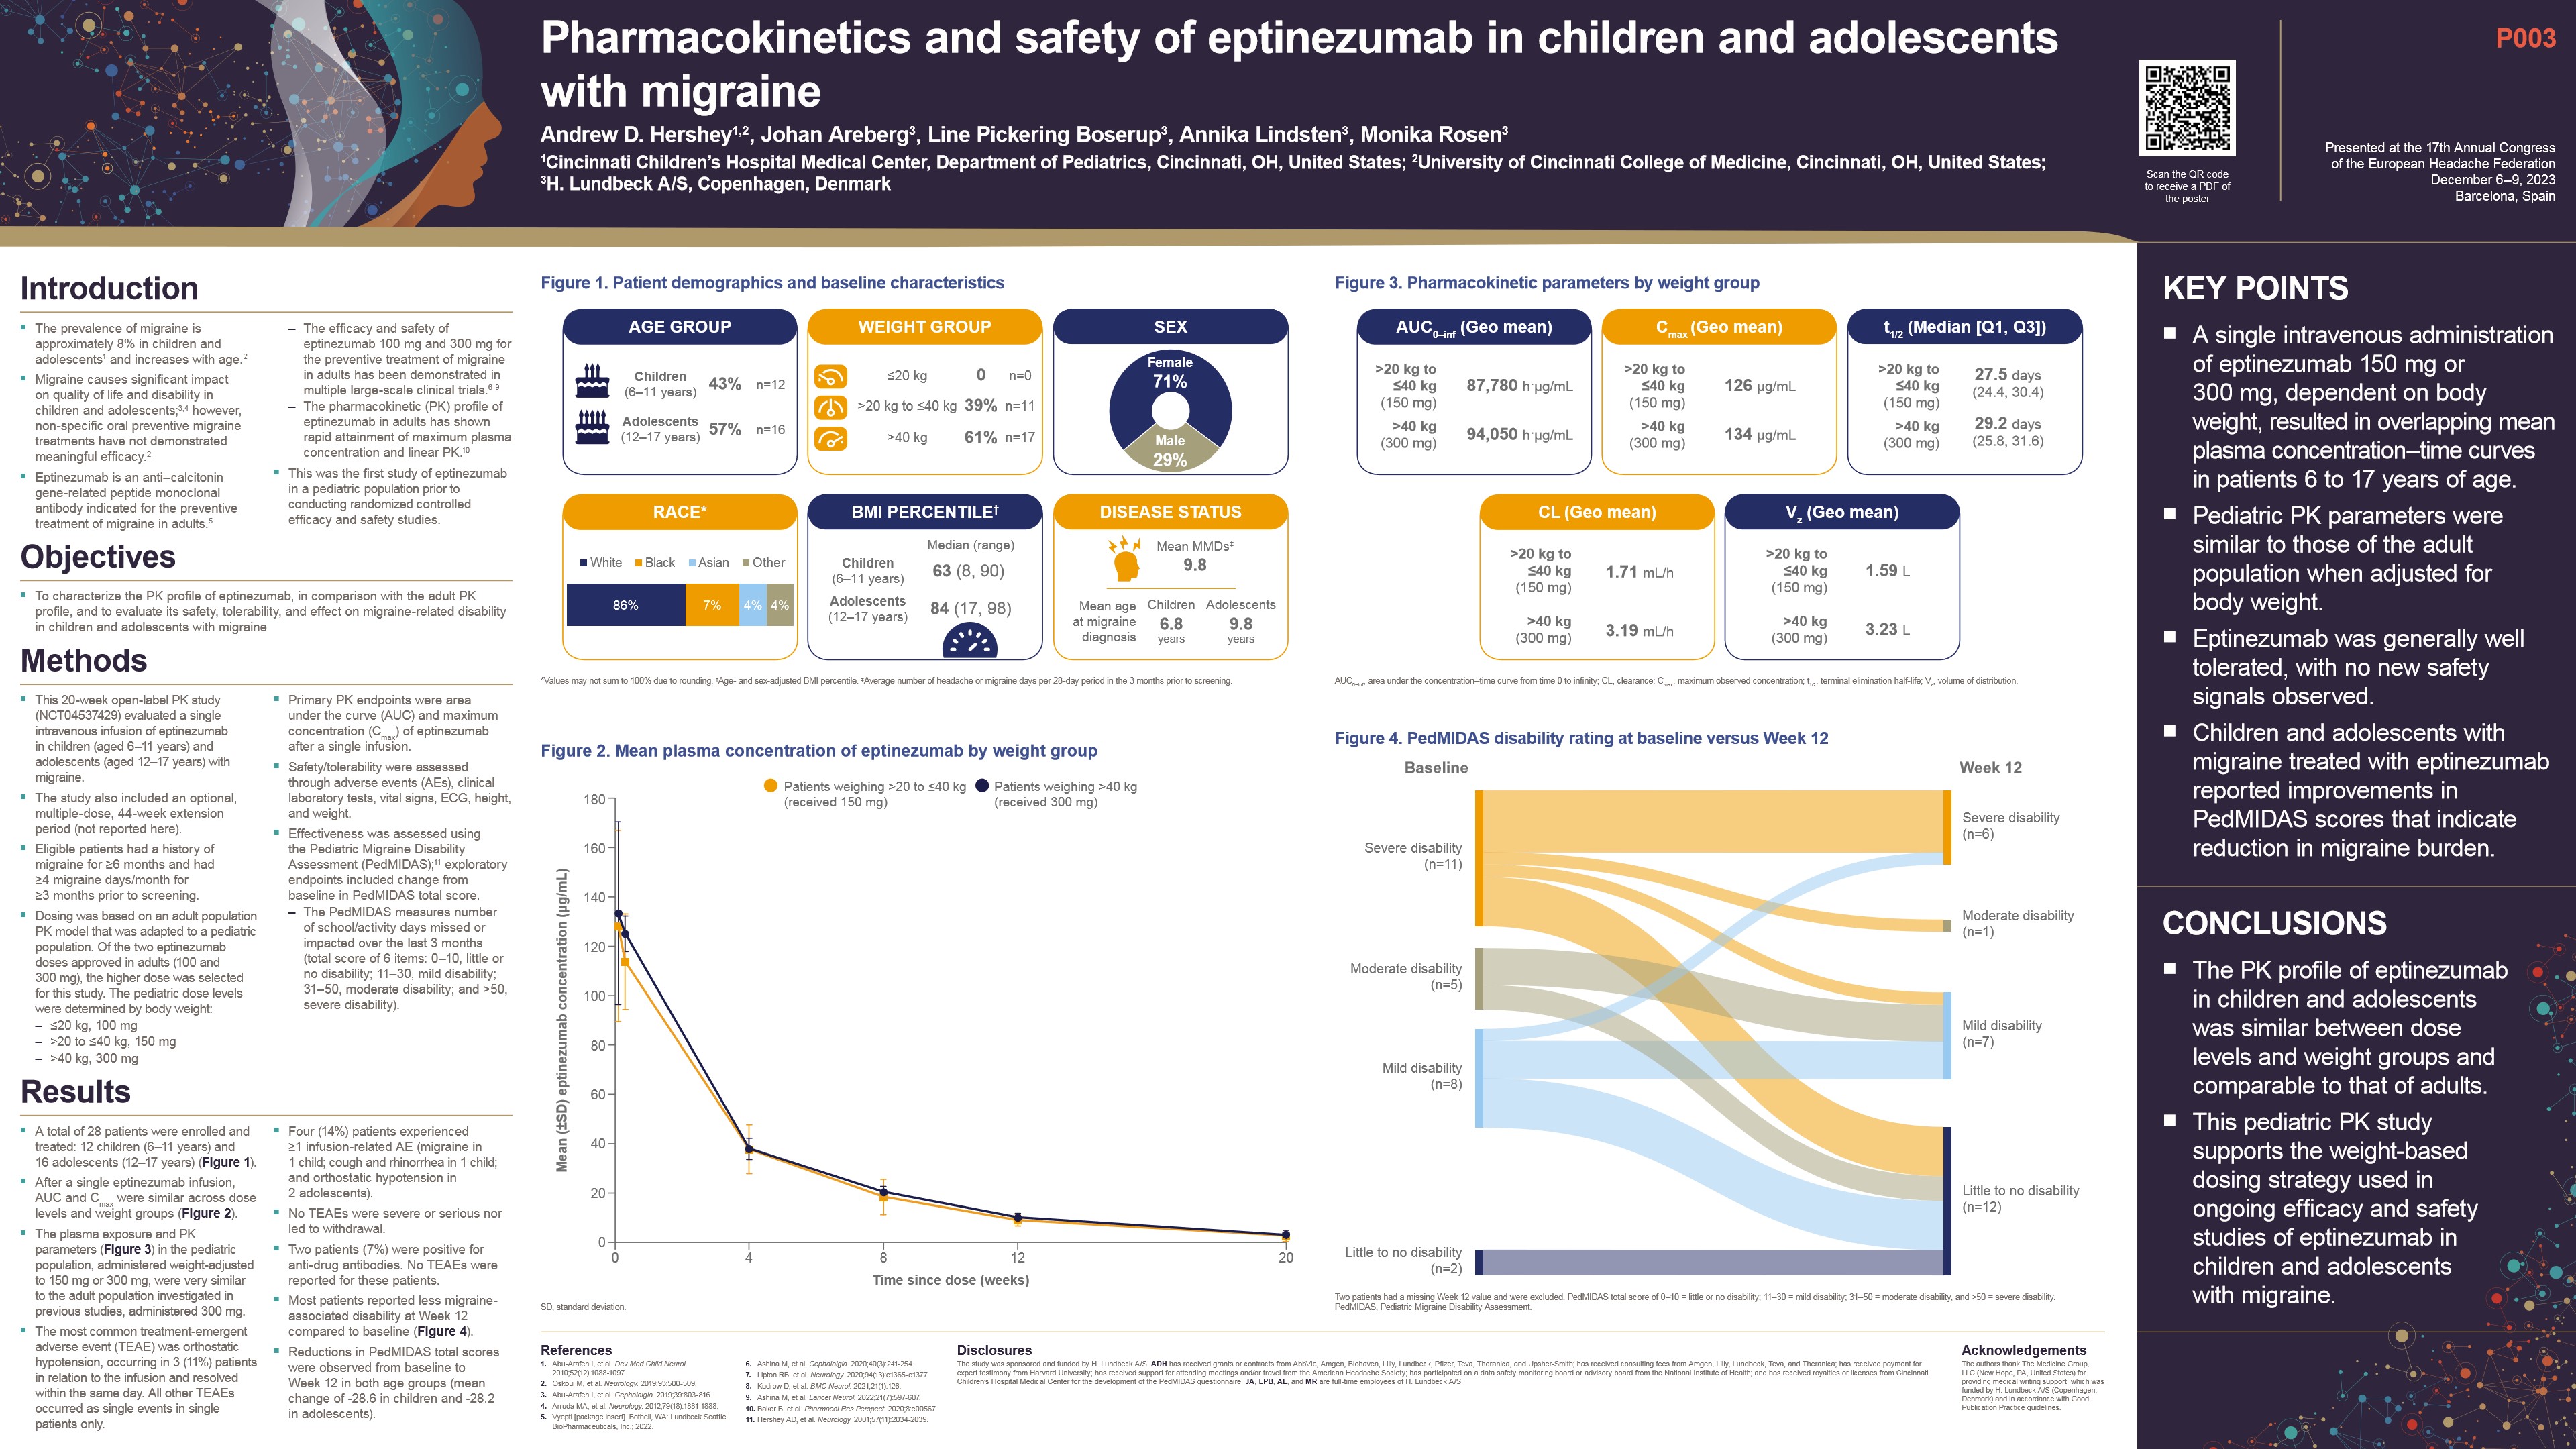 Pharmacokinetics and safety of eptinezumab in children and adolescents with migraine